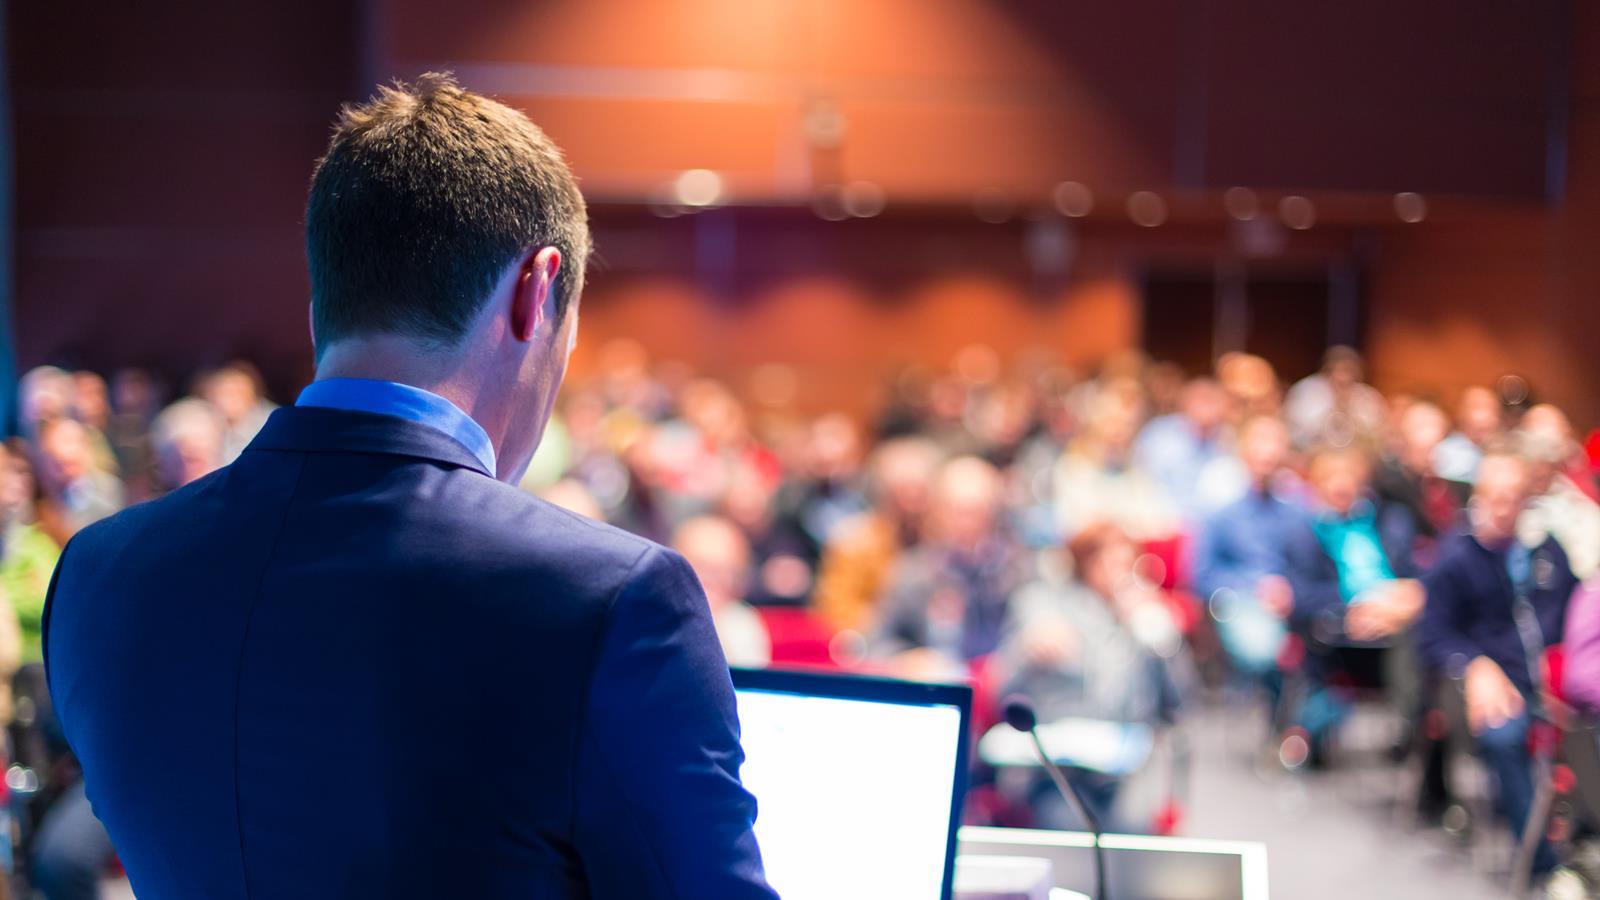 Man giving presentation to large audience